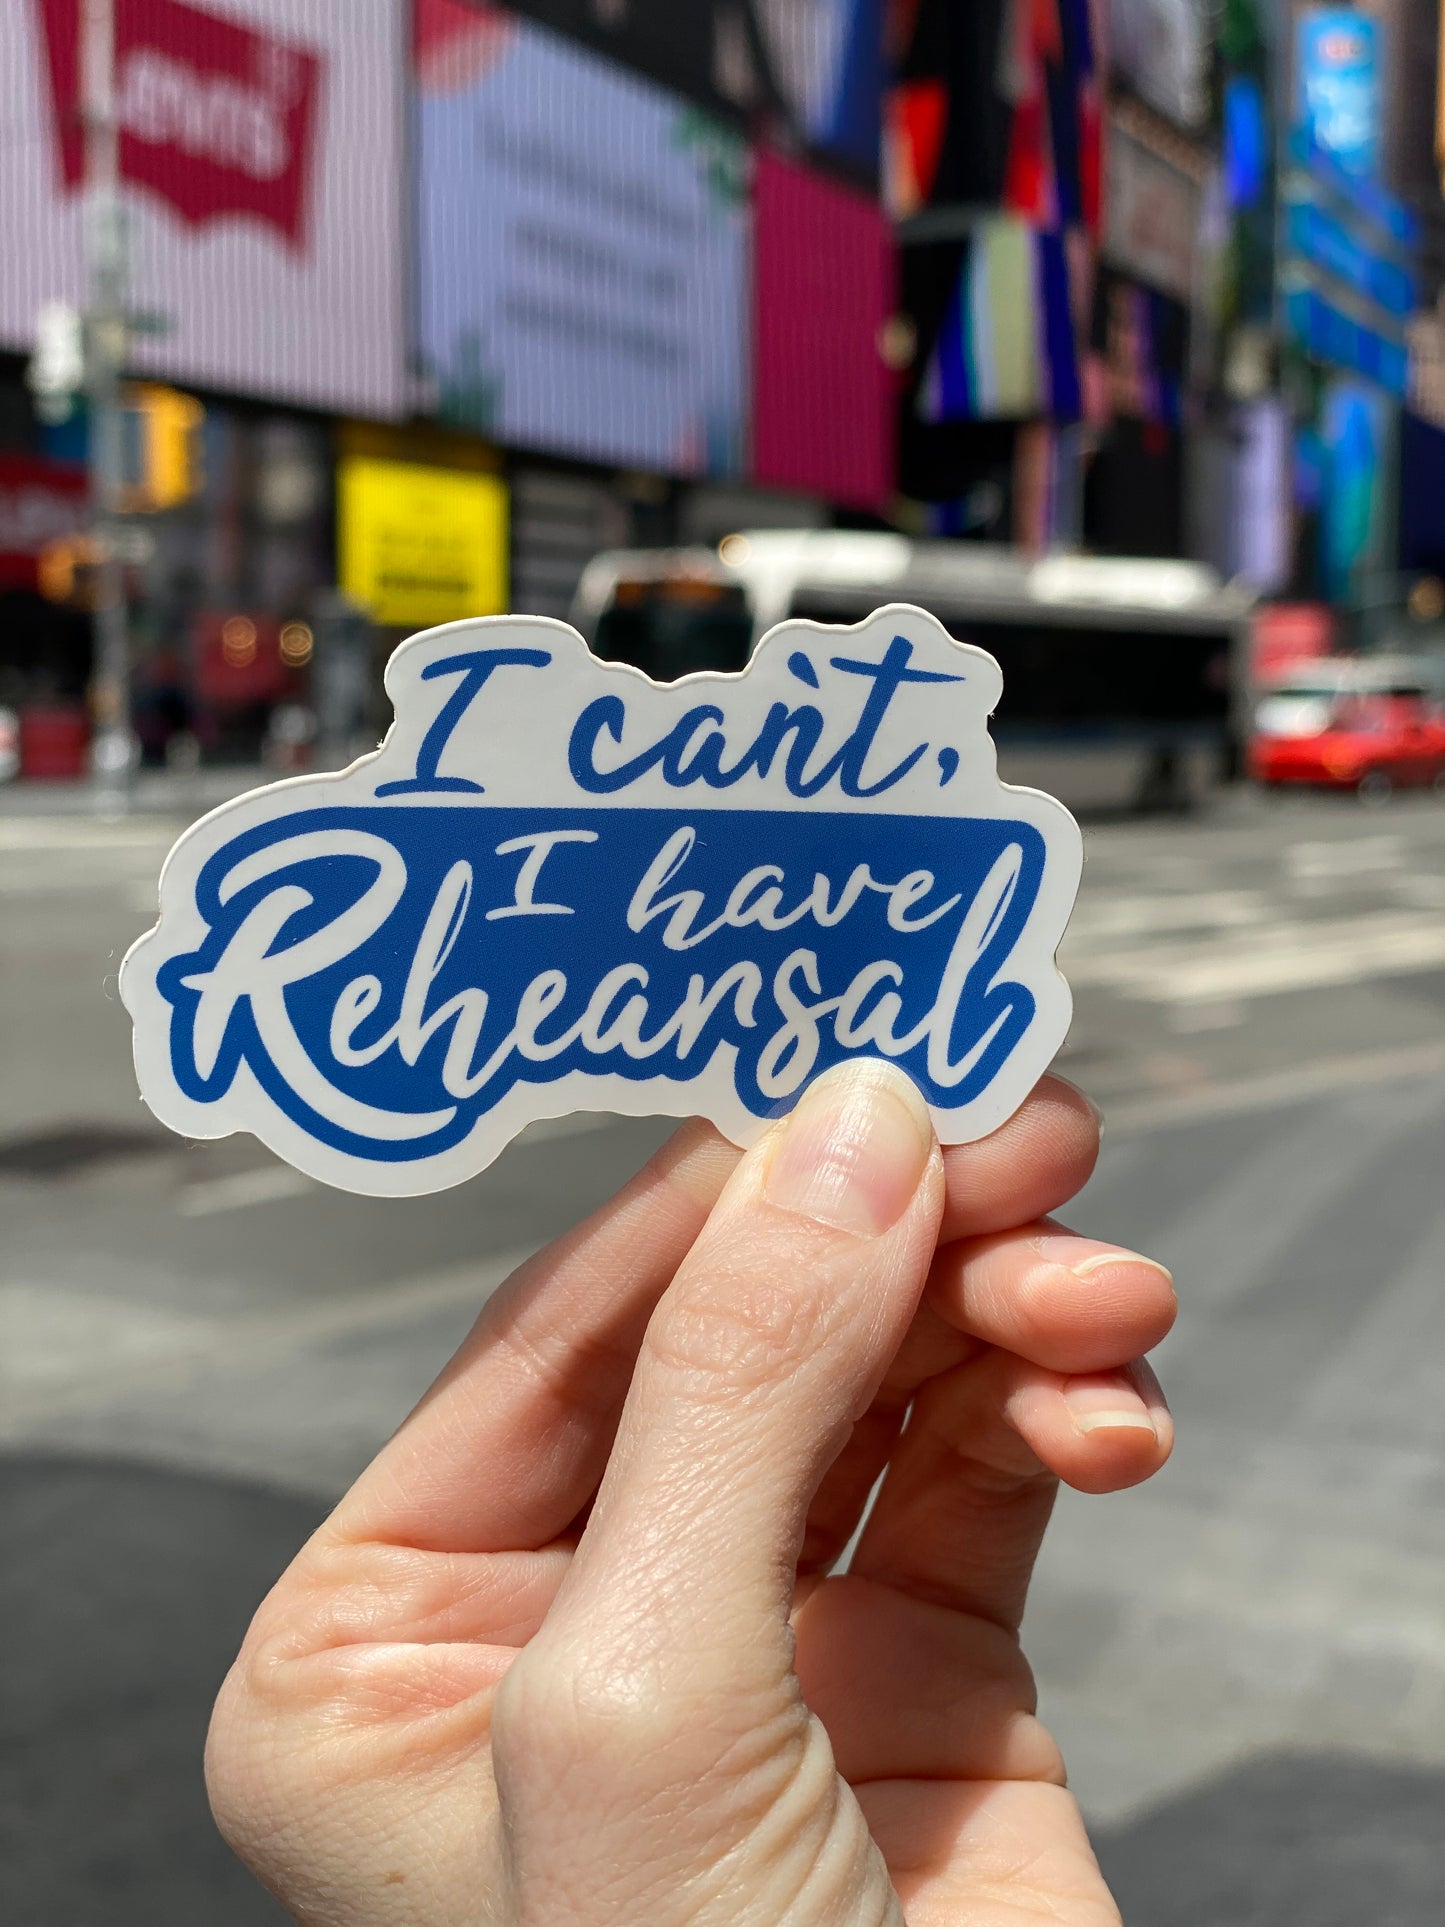 I Can't, I Have Rehearsal Sticker